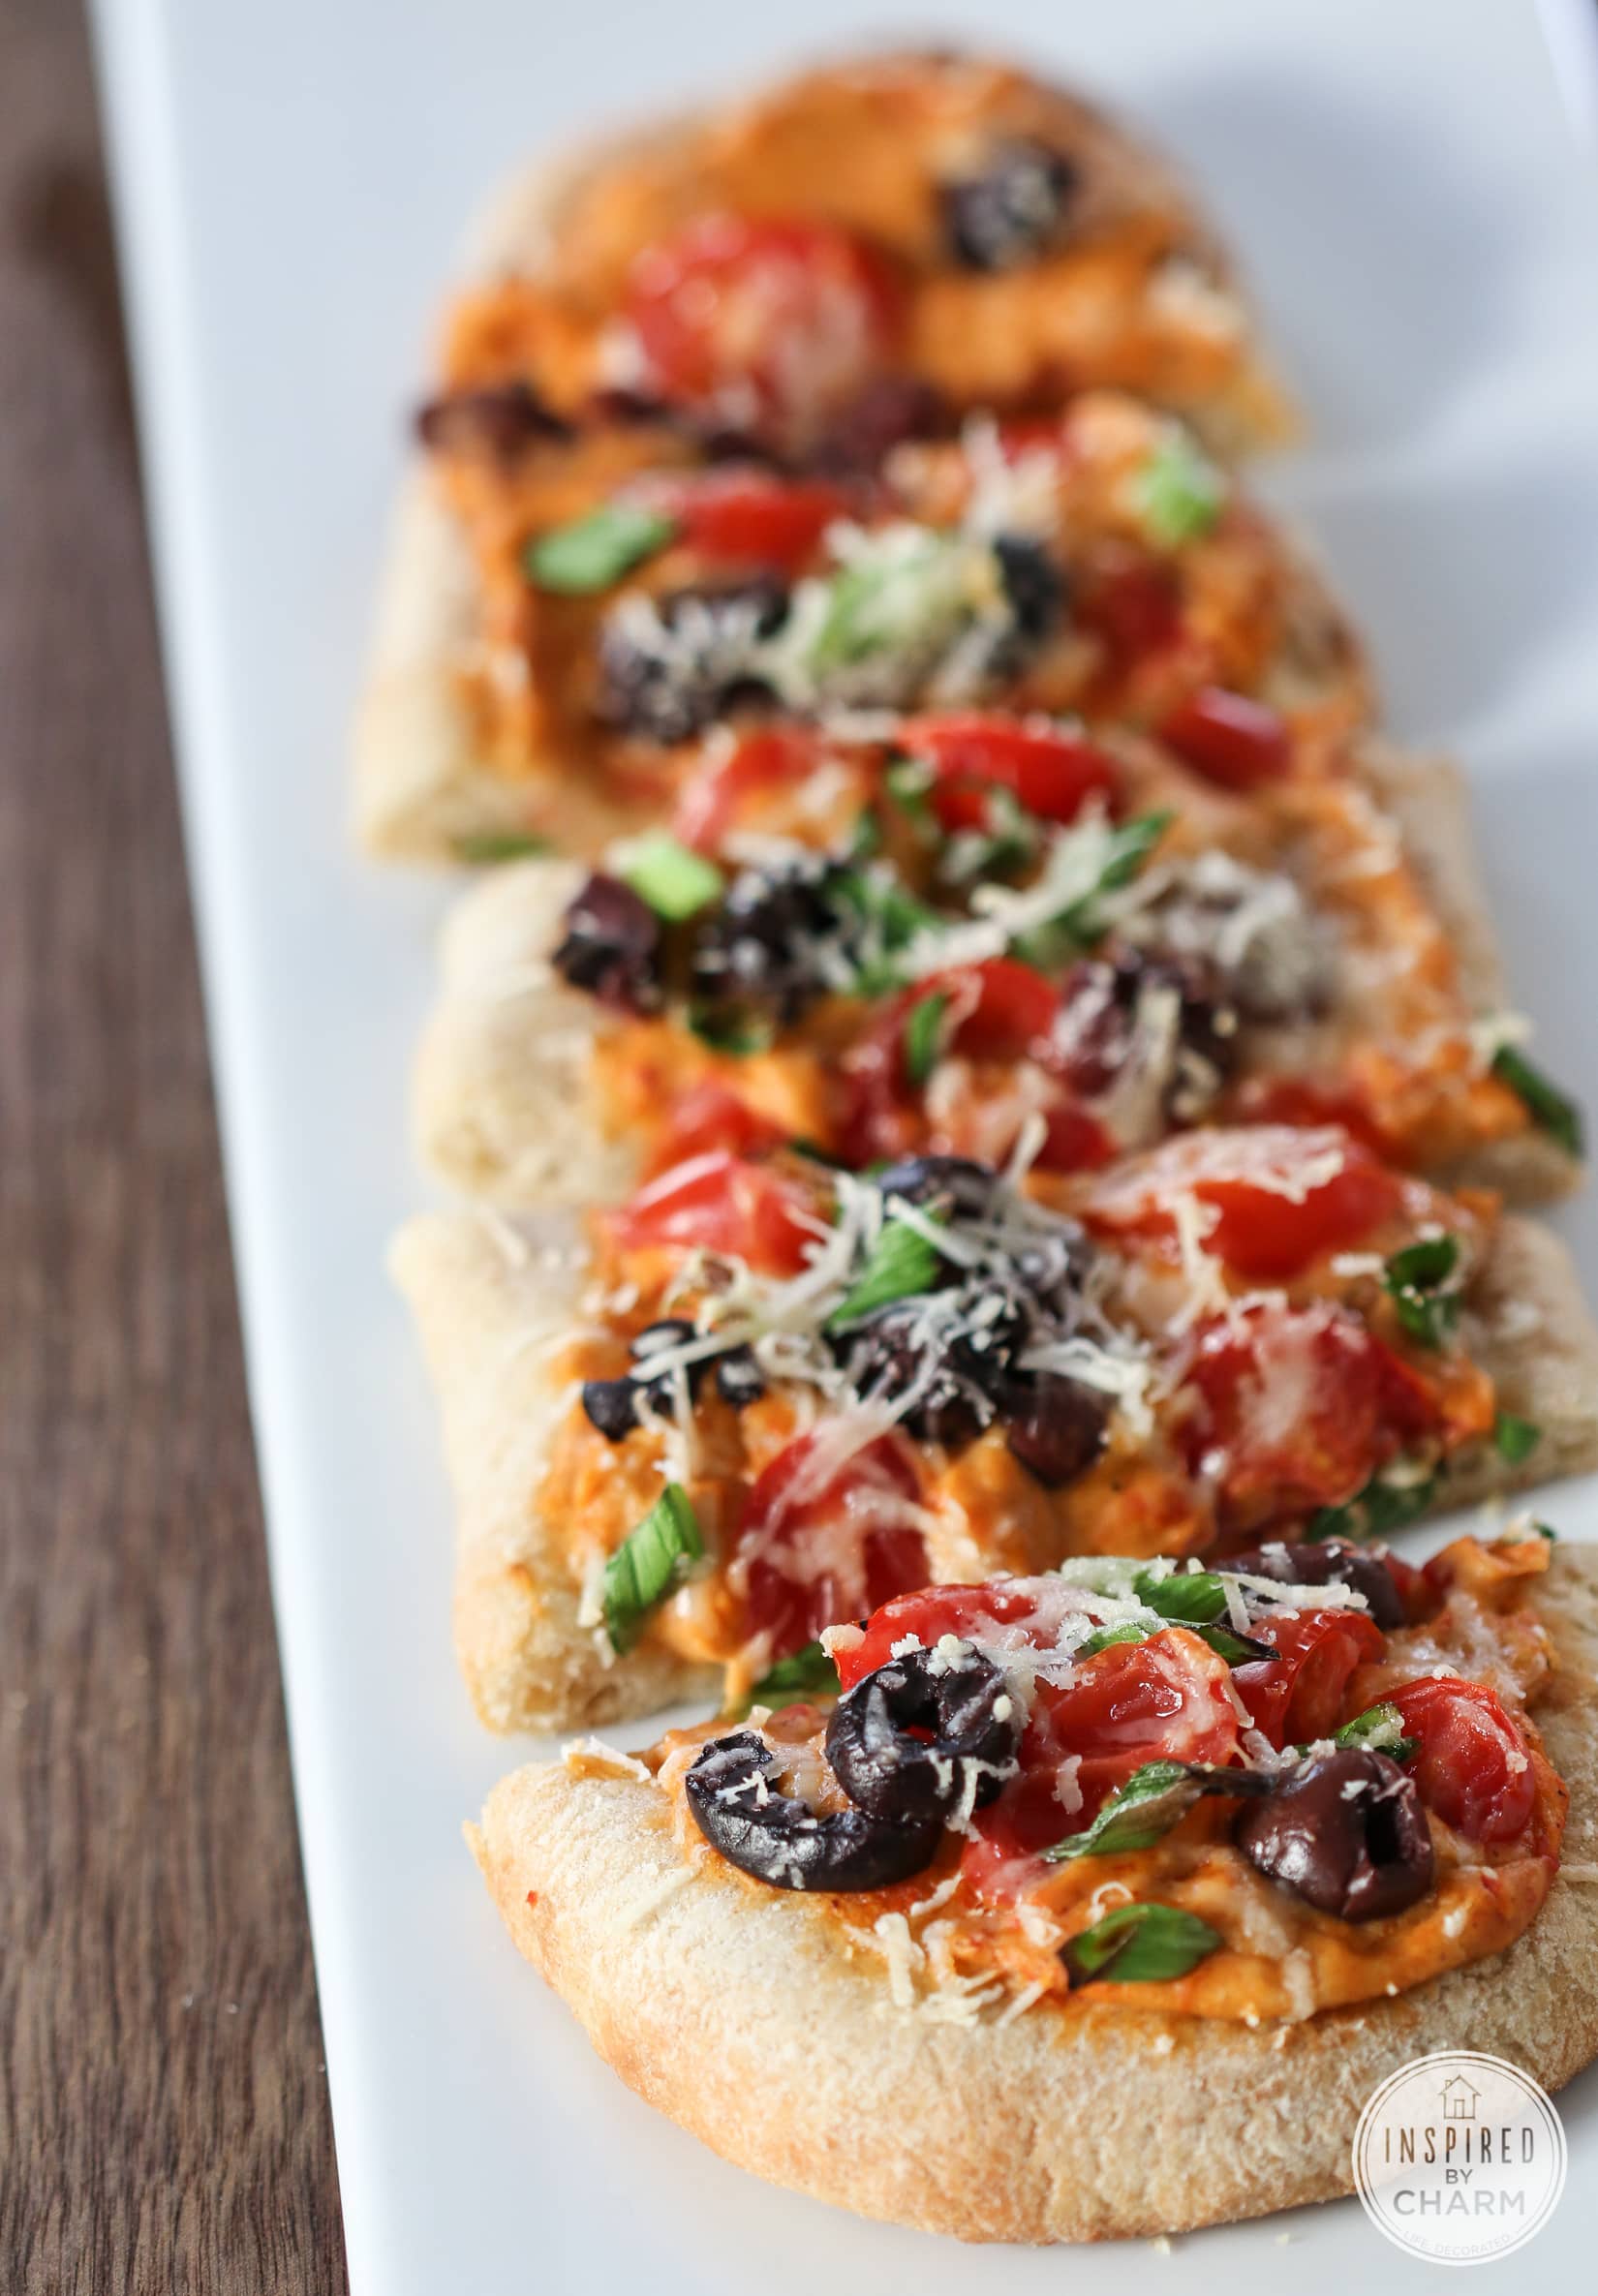 Flatbread topped with hummus, olives, tomatoes, green onions, and cheese